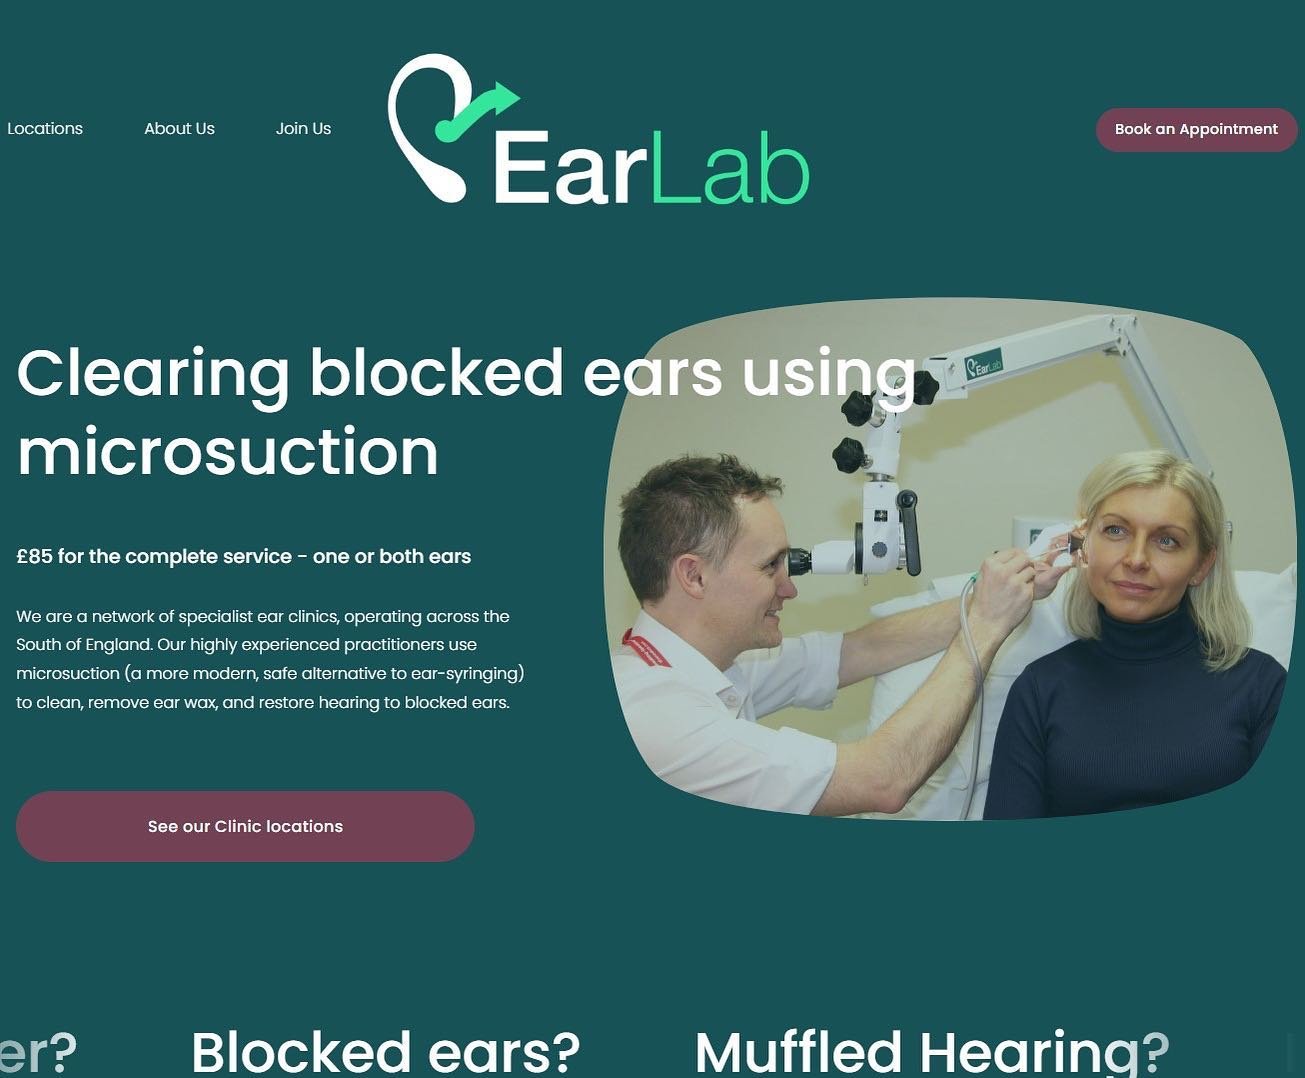 New Year, New Website!

If you haven&rsquo;t already seen it, we recently launched our completely new website. Lots more information about what we do, our clinic locations and the team behind EarLab. Please have a look to find out a bit more about us